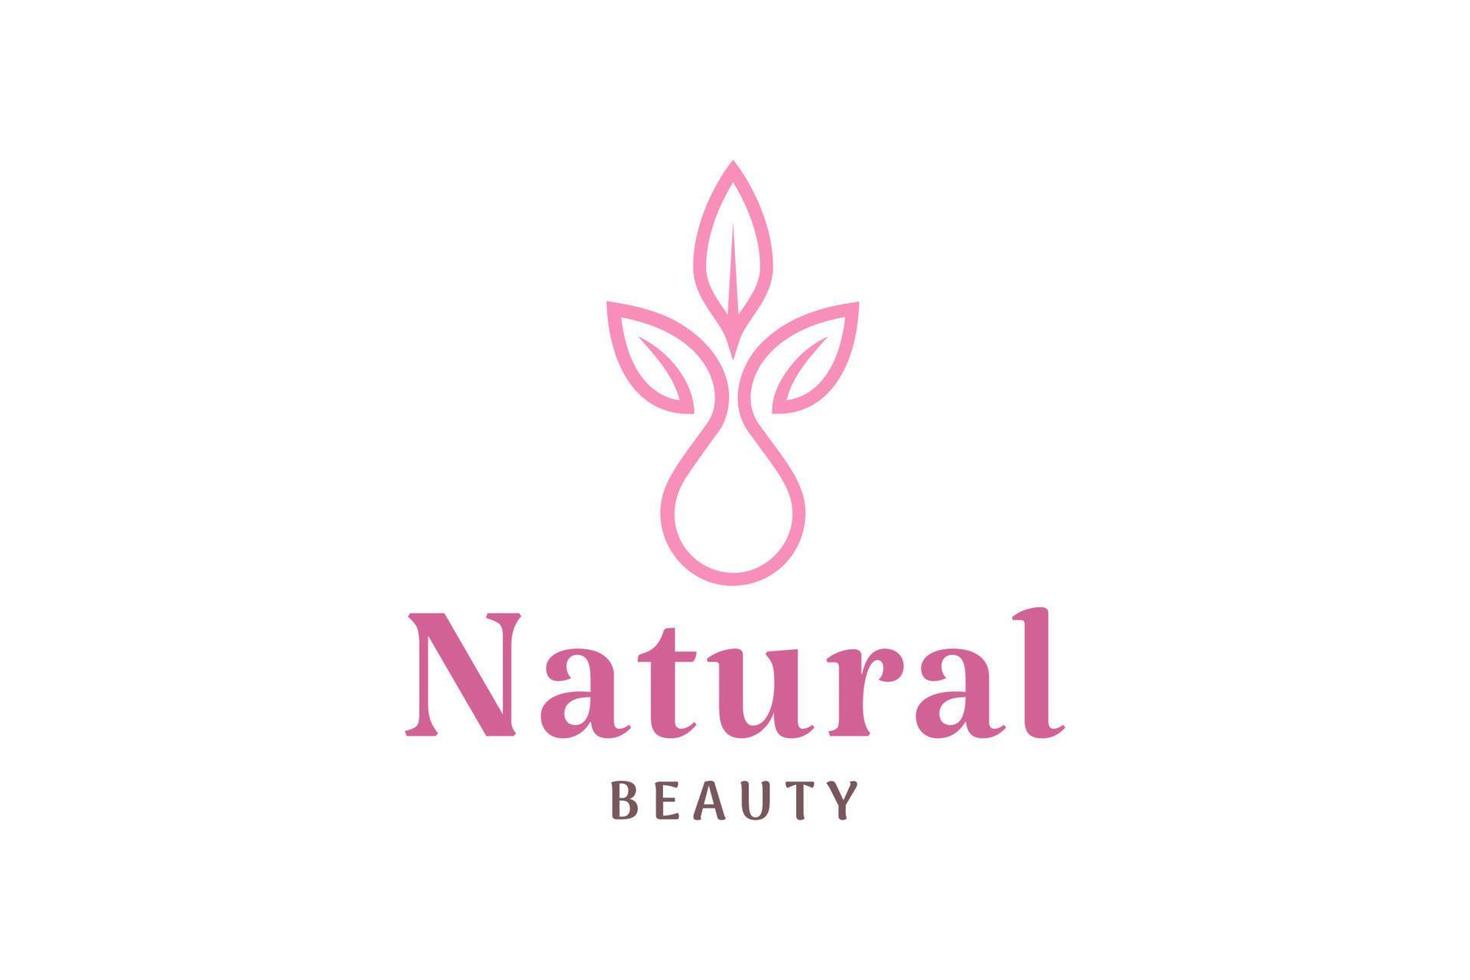 Leaf and droplet logo for beauty industry vector